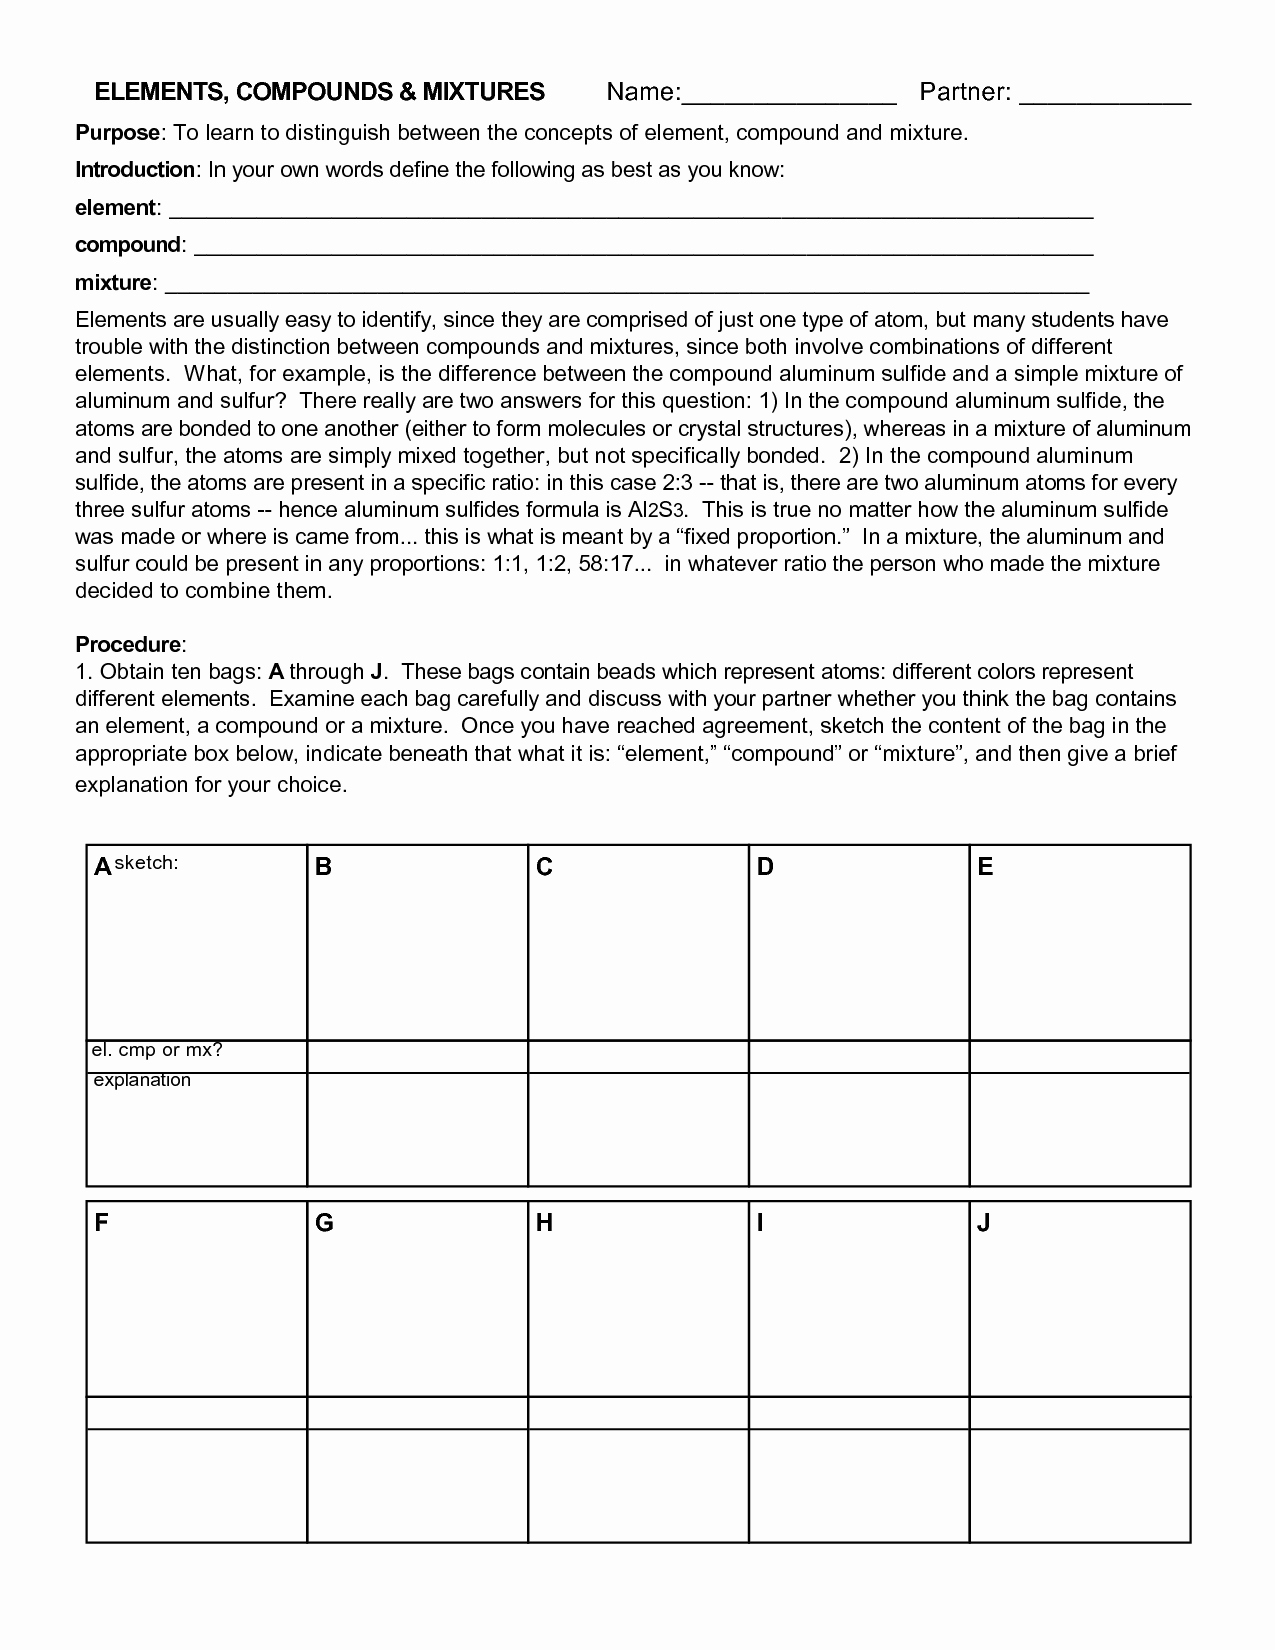 Elements Compounds and Mixtures Worksheet Beautiful Elements Pounds and Mixtures Coloring Worksheet